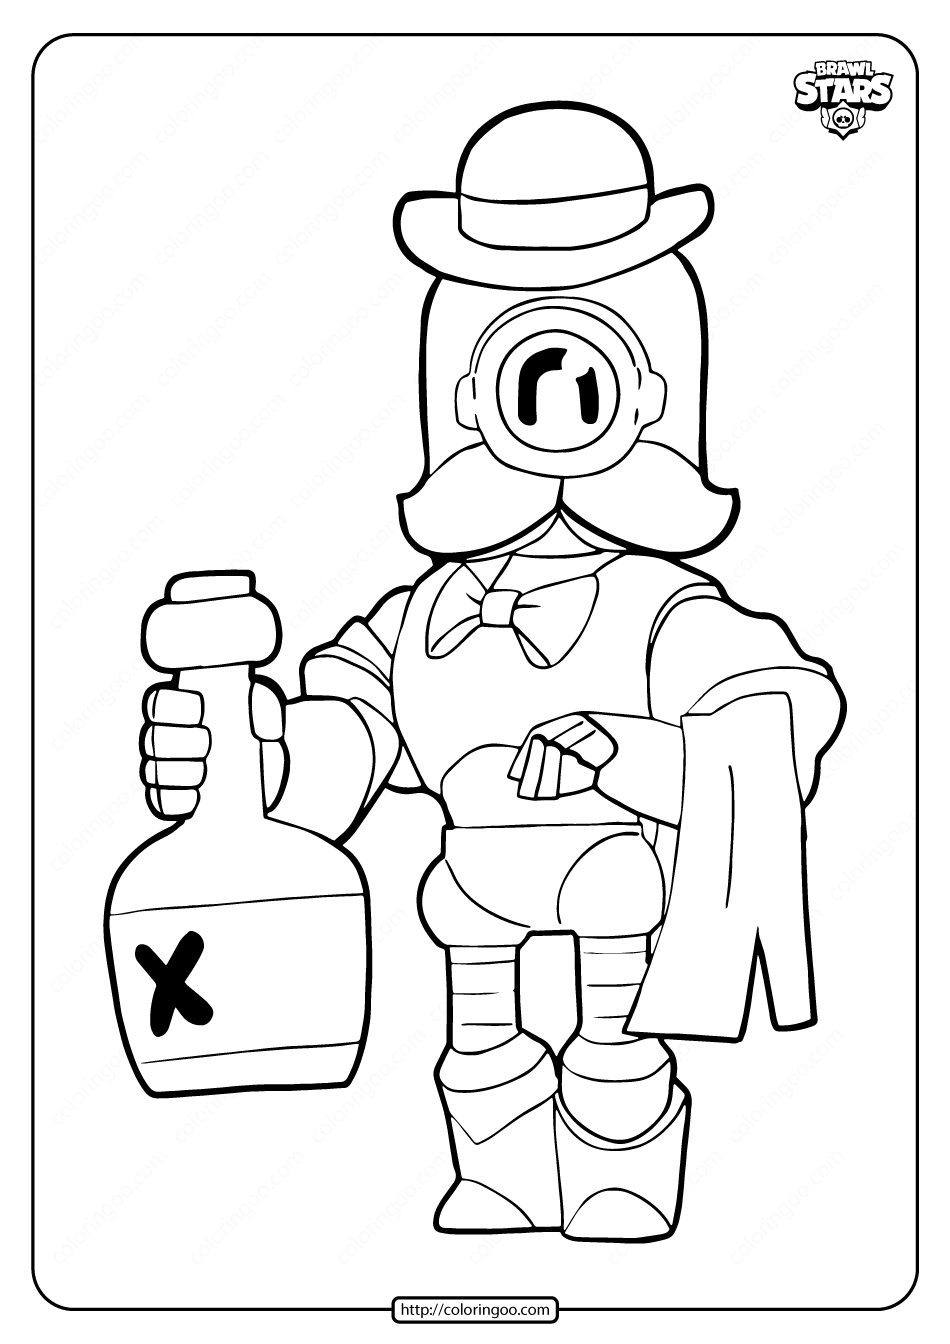 wizard barley bravo stars coloring pages